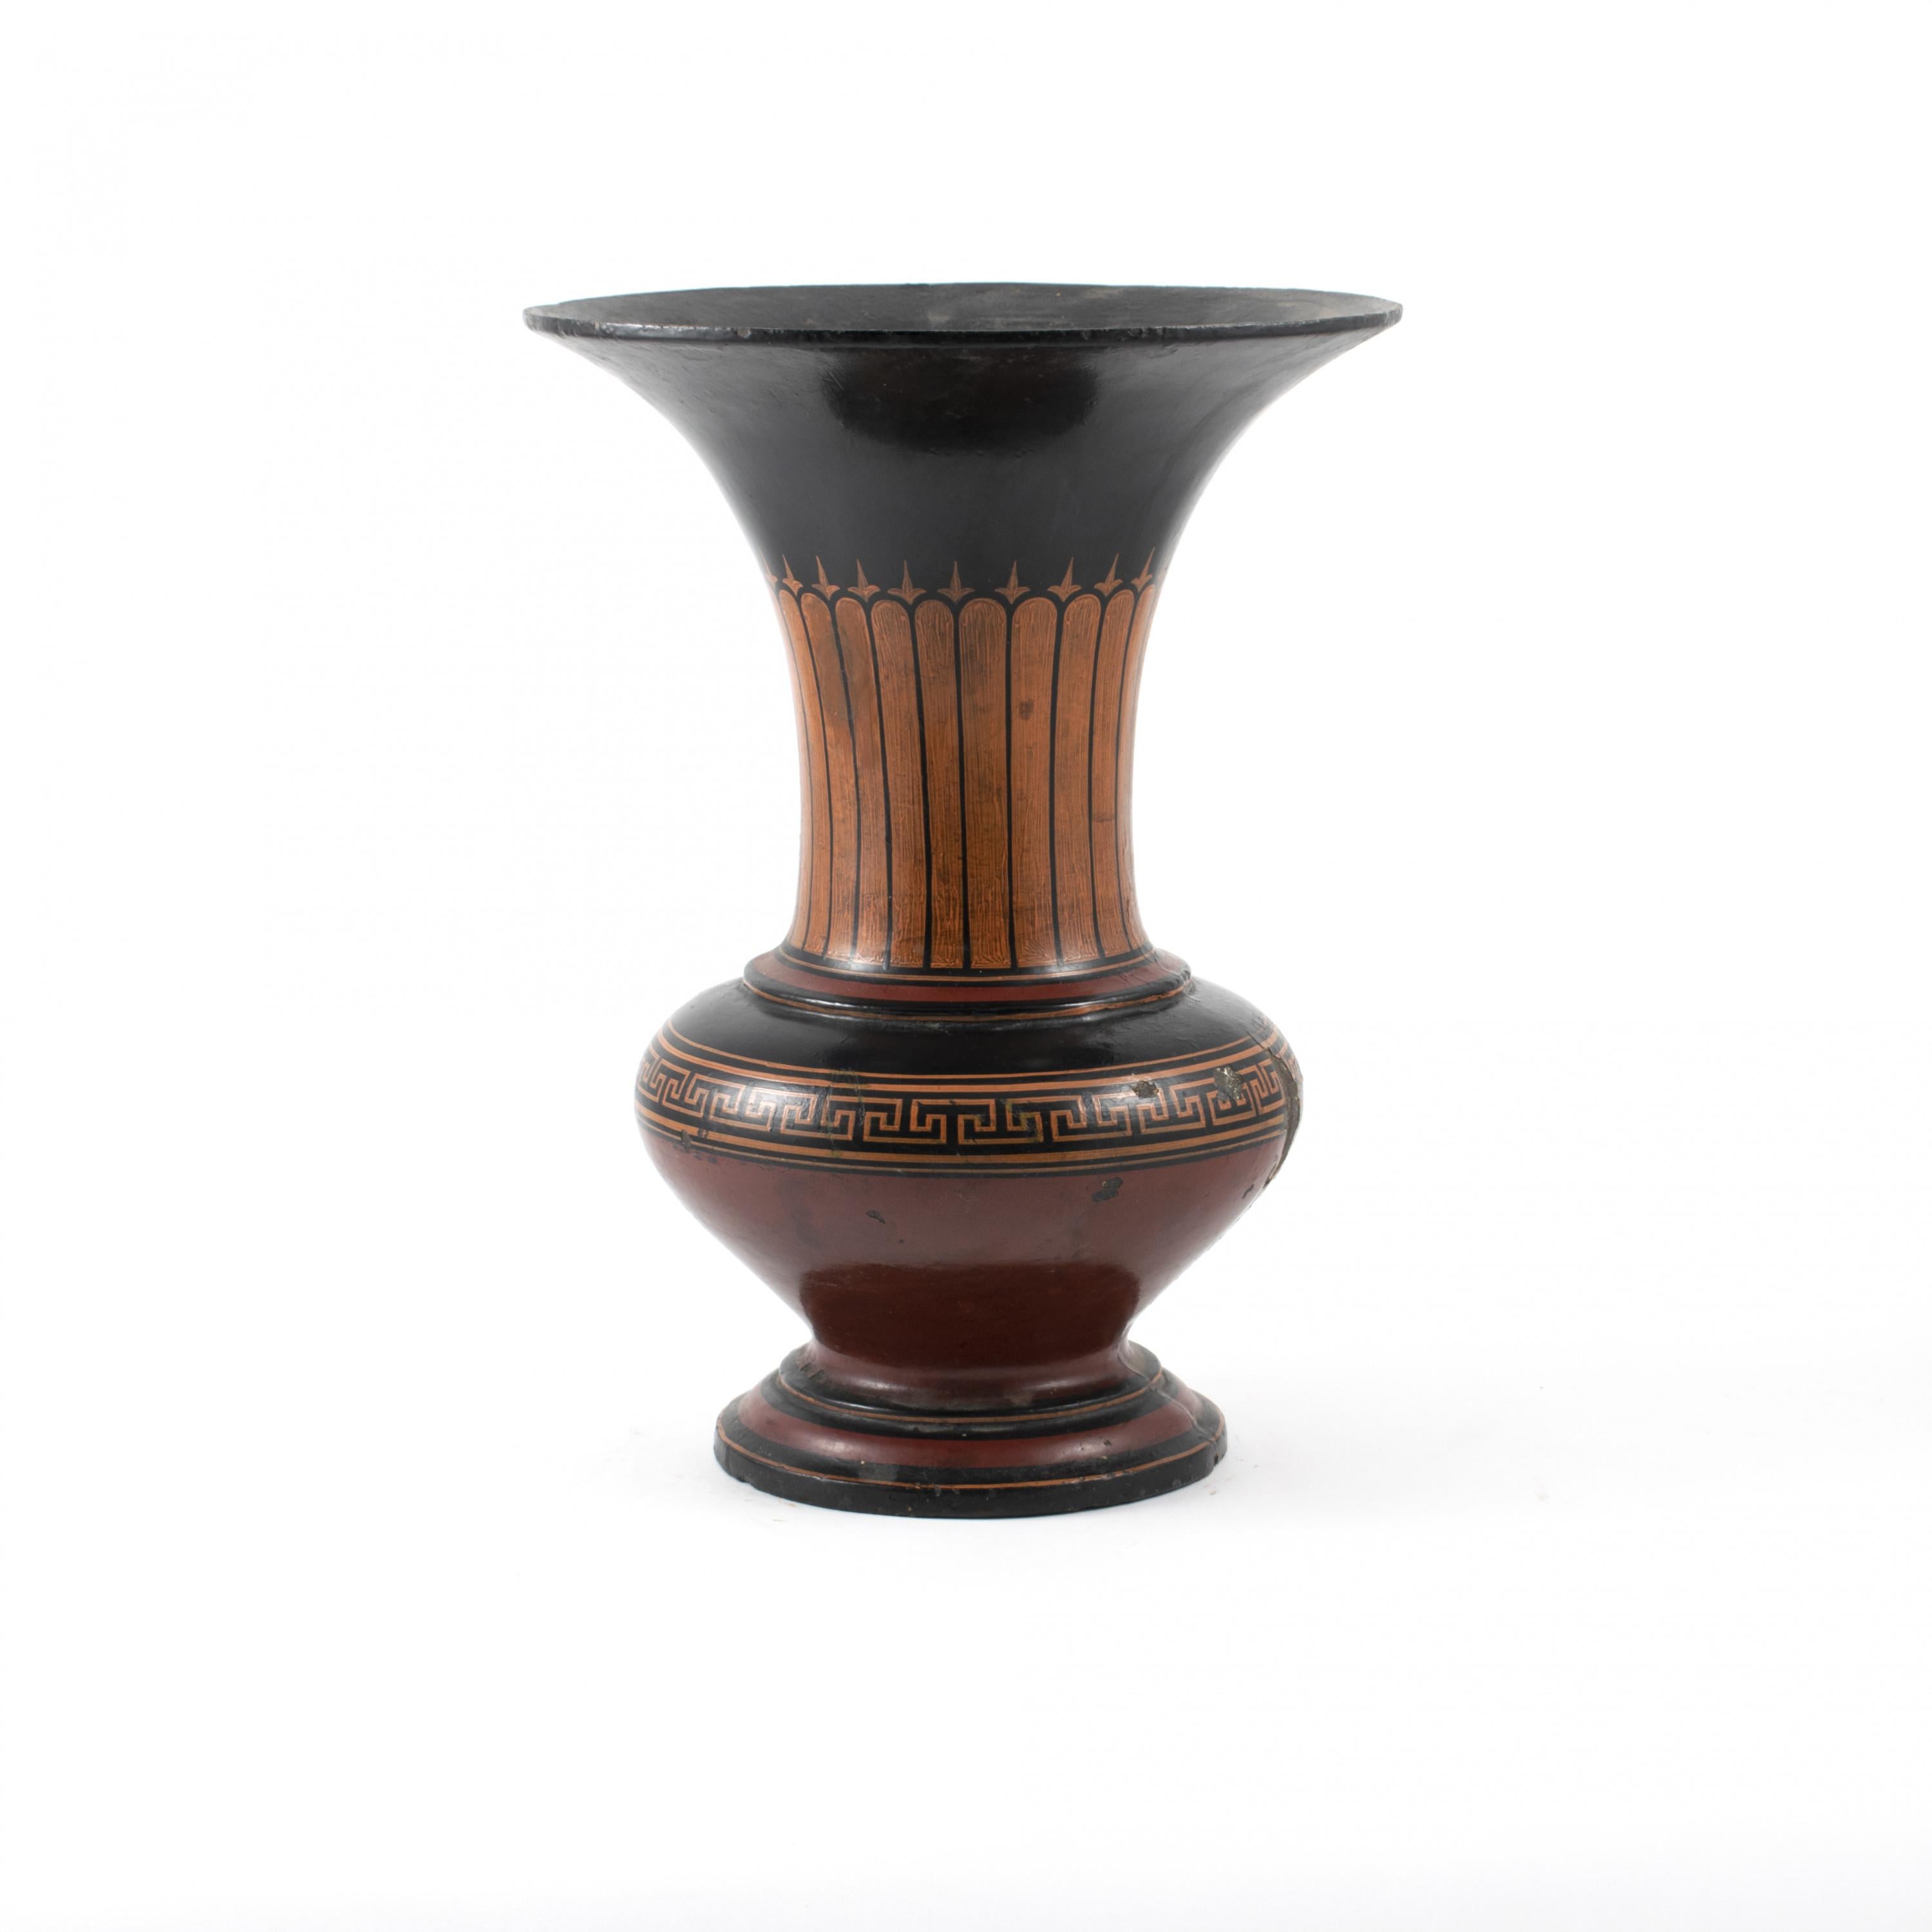 Cast iron vase in the ancient style. Black, red and burnt orange decorations.
In original and untouched condition with beautiful patina consistent with age and use.
Very decorative and elegant form.
Denmark, mid-19th century.